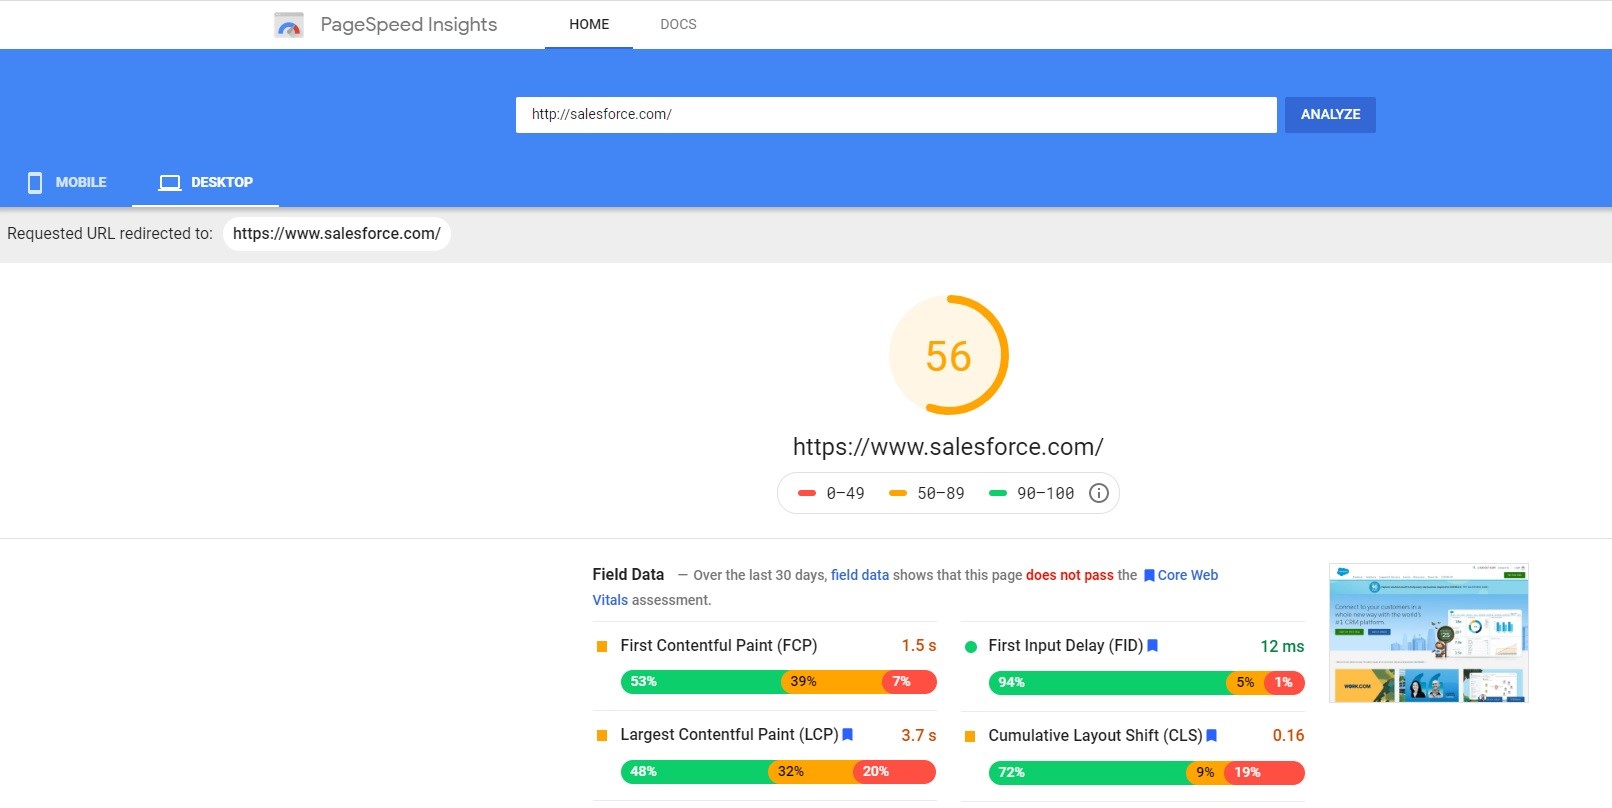 Google PageSpeed Insights analysis into Salesforce's website